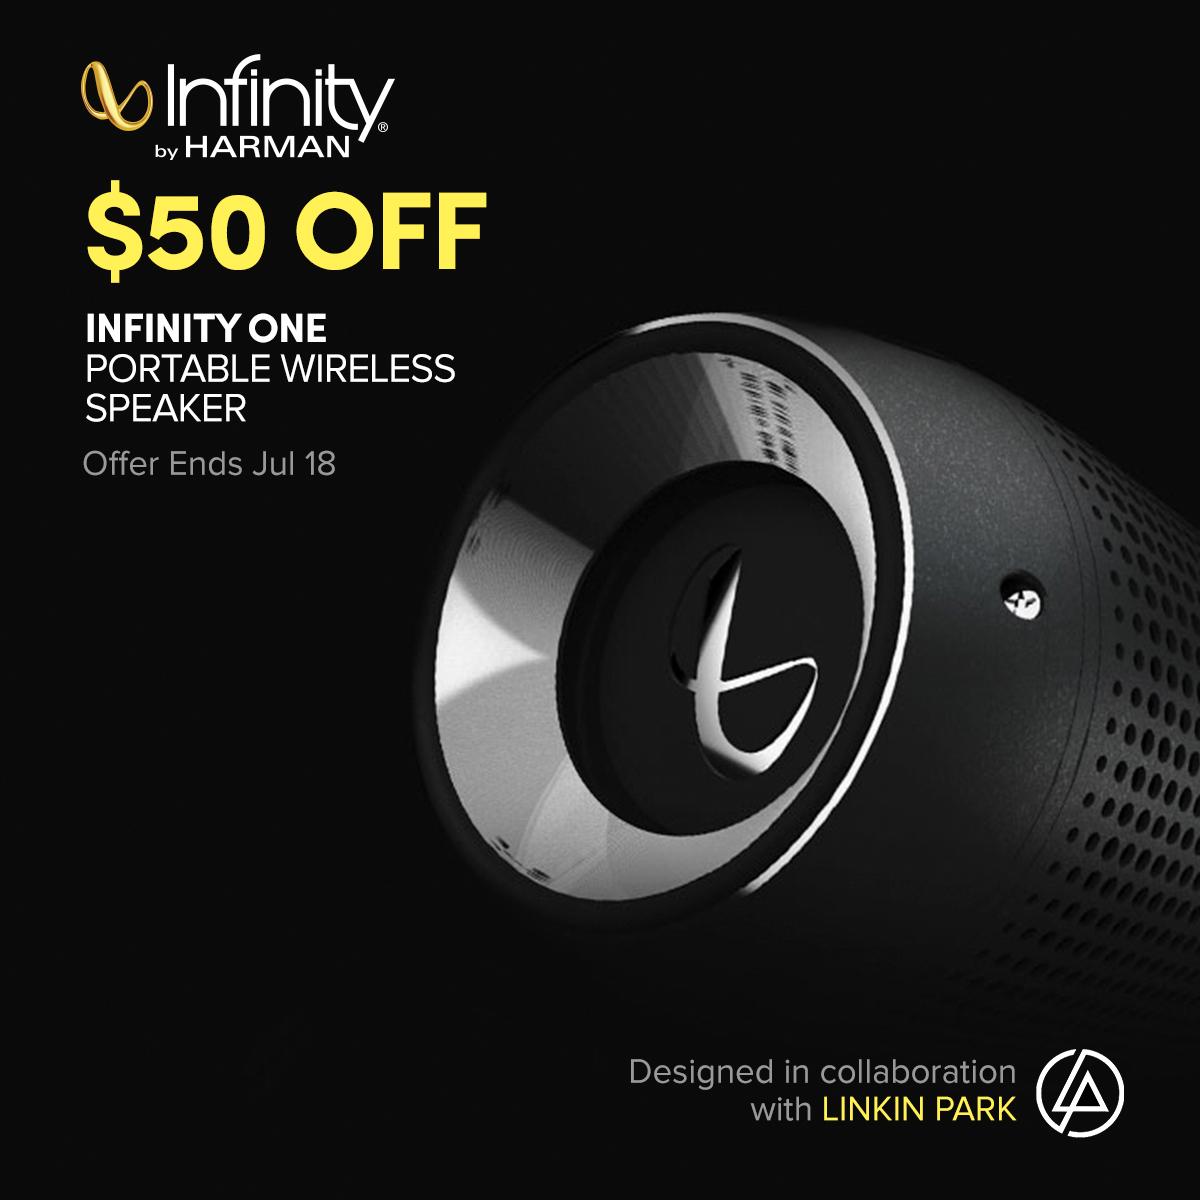 Our friends @InfinityAudio are offering a deal on the #InfinityOne speaker. Check it out at http://t.co/BUFq6HlBYq http://t.co/AKCV2CZ8cX